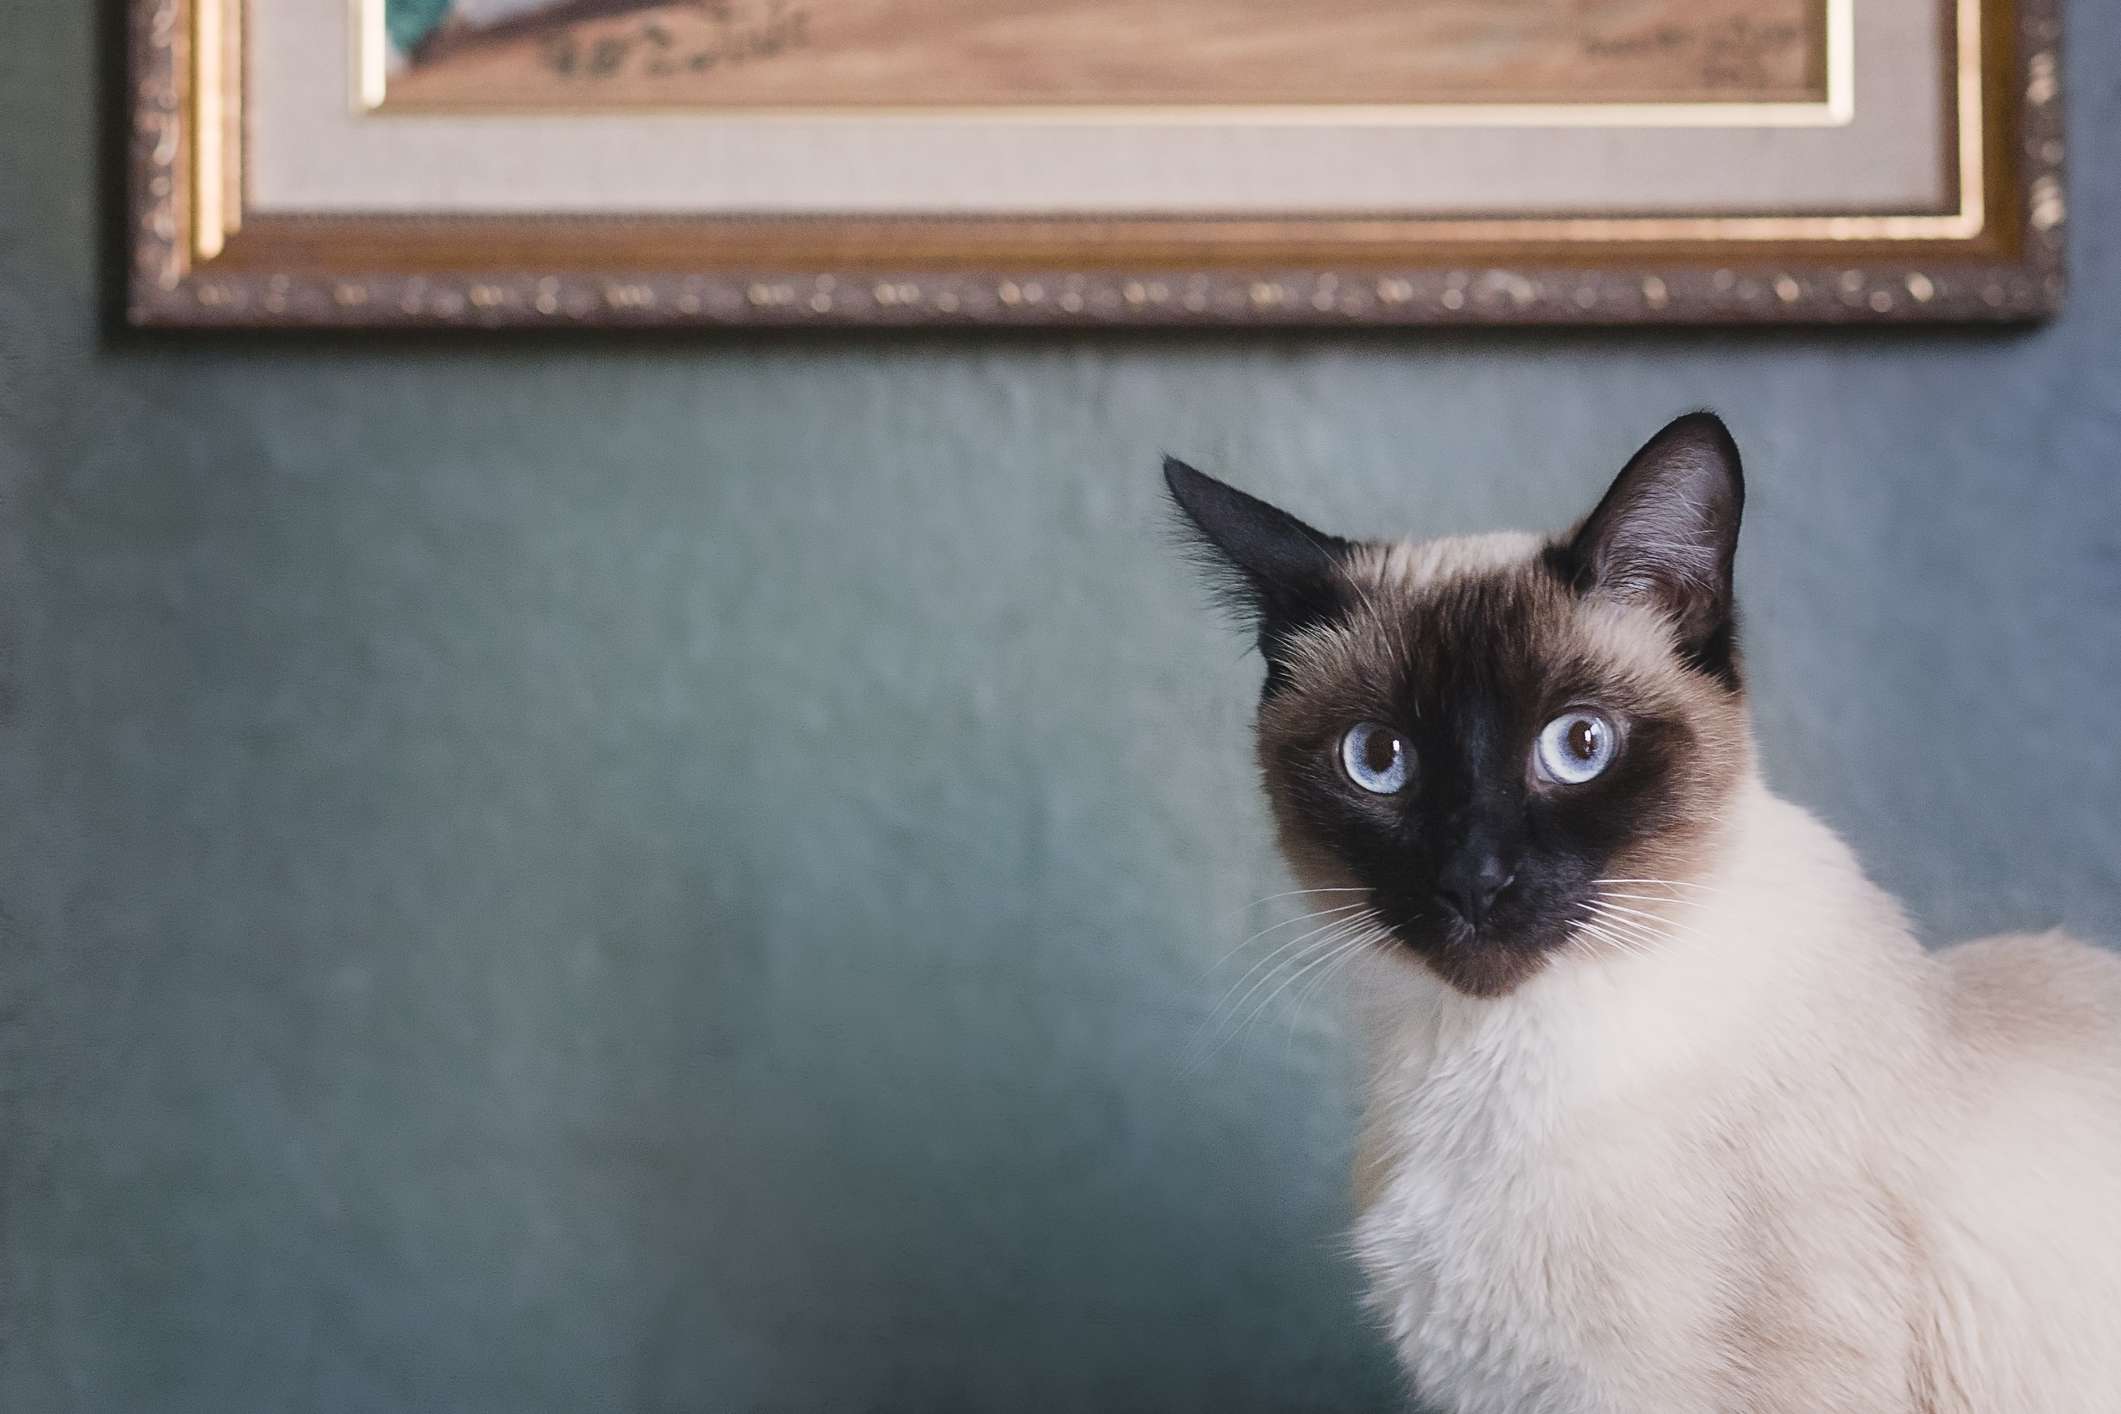 A Siamese cat with a dark face and blue eyes standing in front of a teal wall.